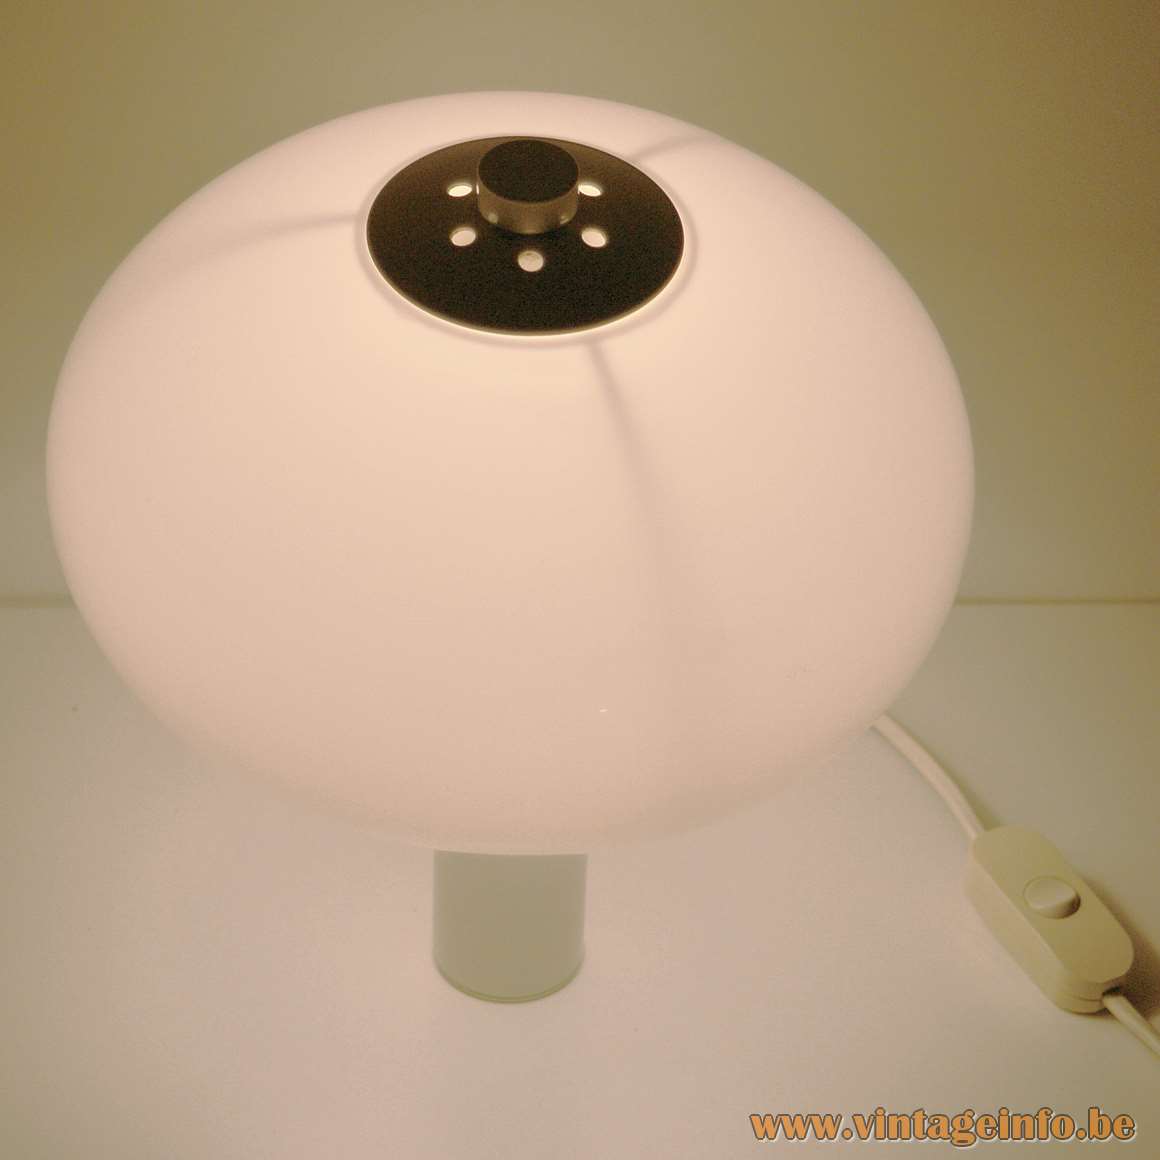 Acrylic Mushroom Wall Lamp white plastic and metal produced by MAssive, Belgium 1970s 1980s MCM